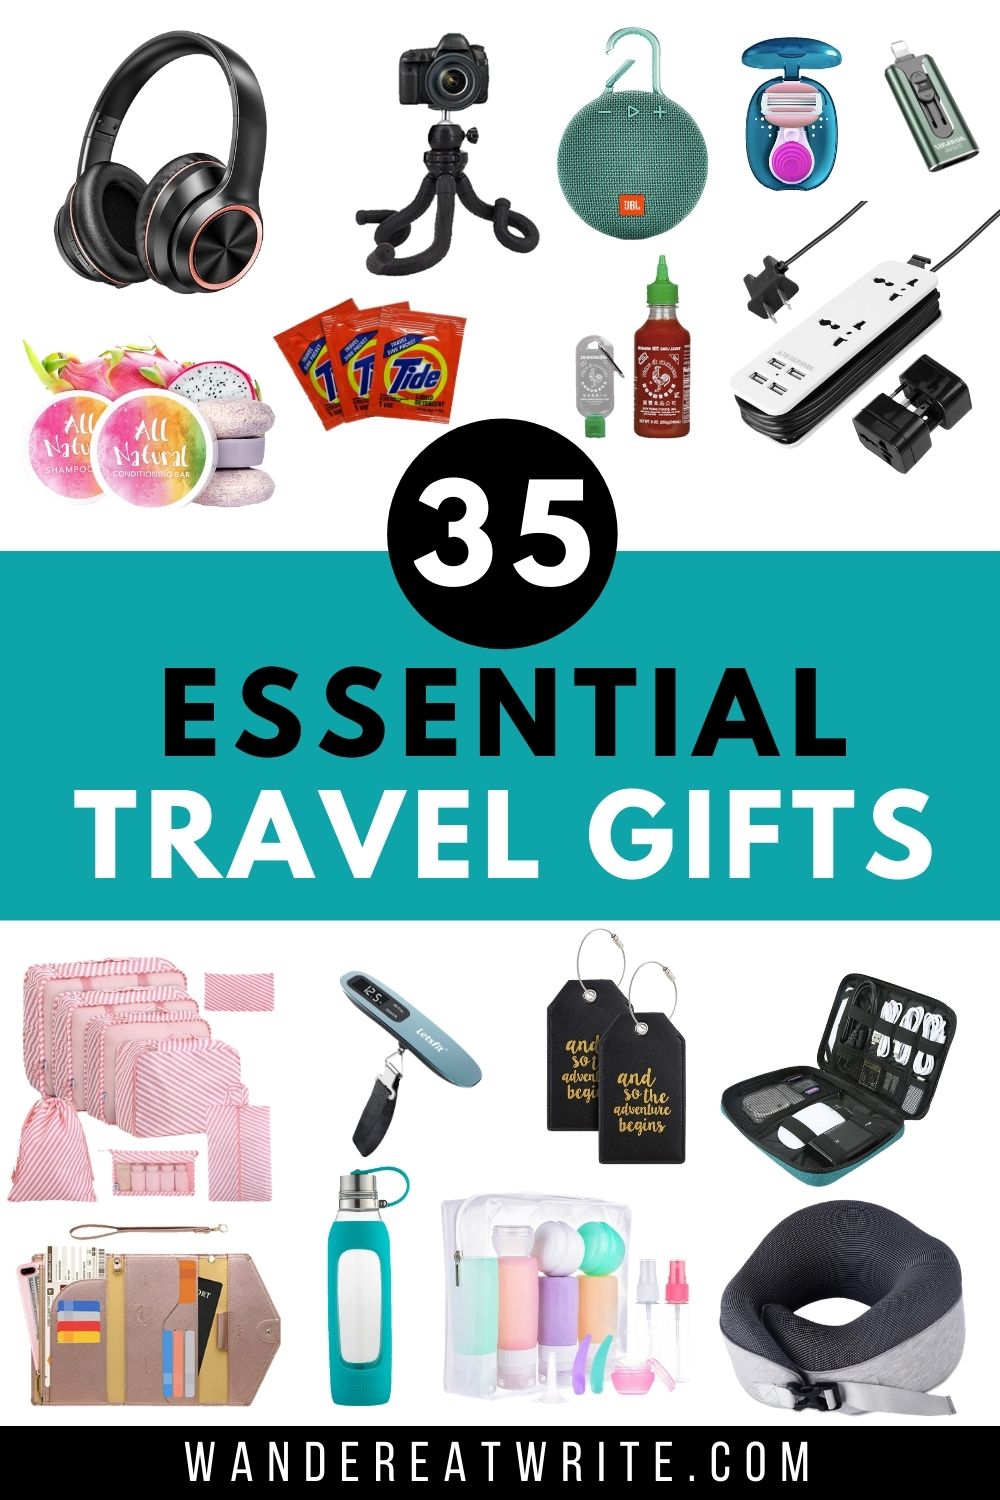 Travel Gift Ideas for Women — A Mom Explores | Family Travel Tips,  Destination Guides with Kids, Family Vacation Ideas, and more!